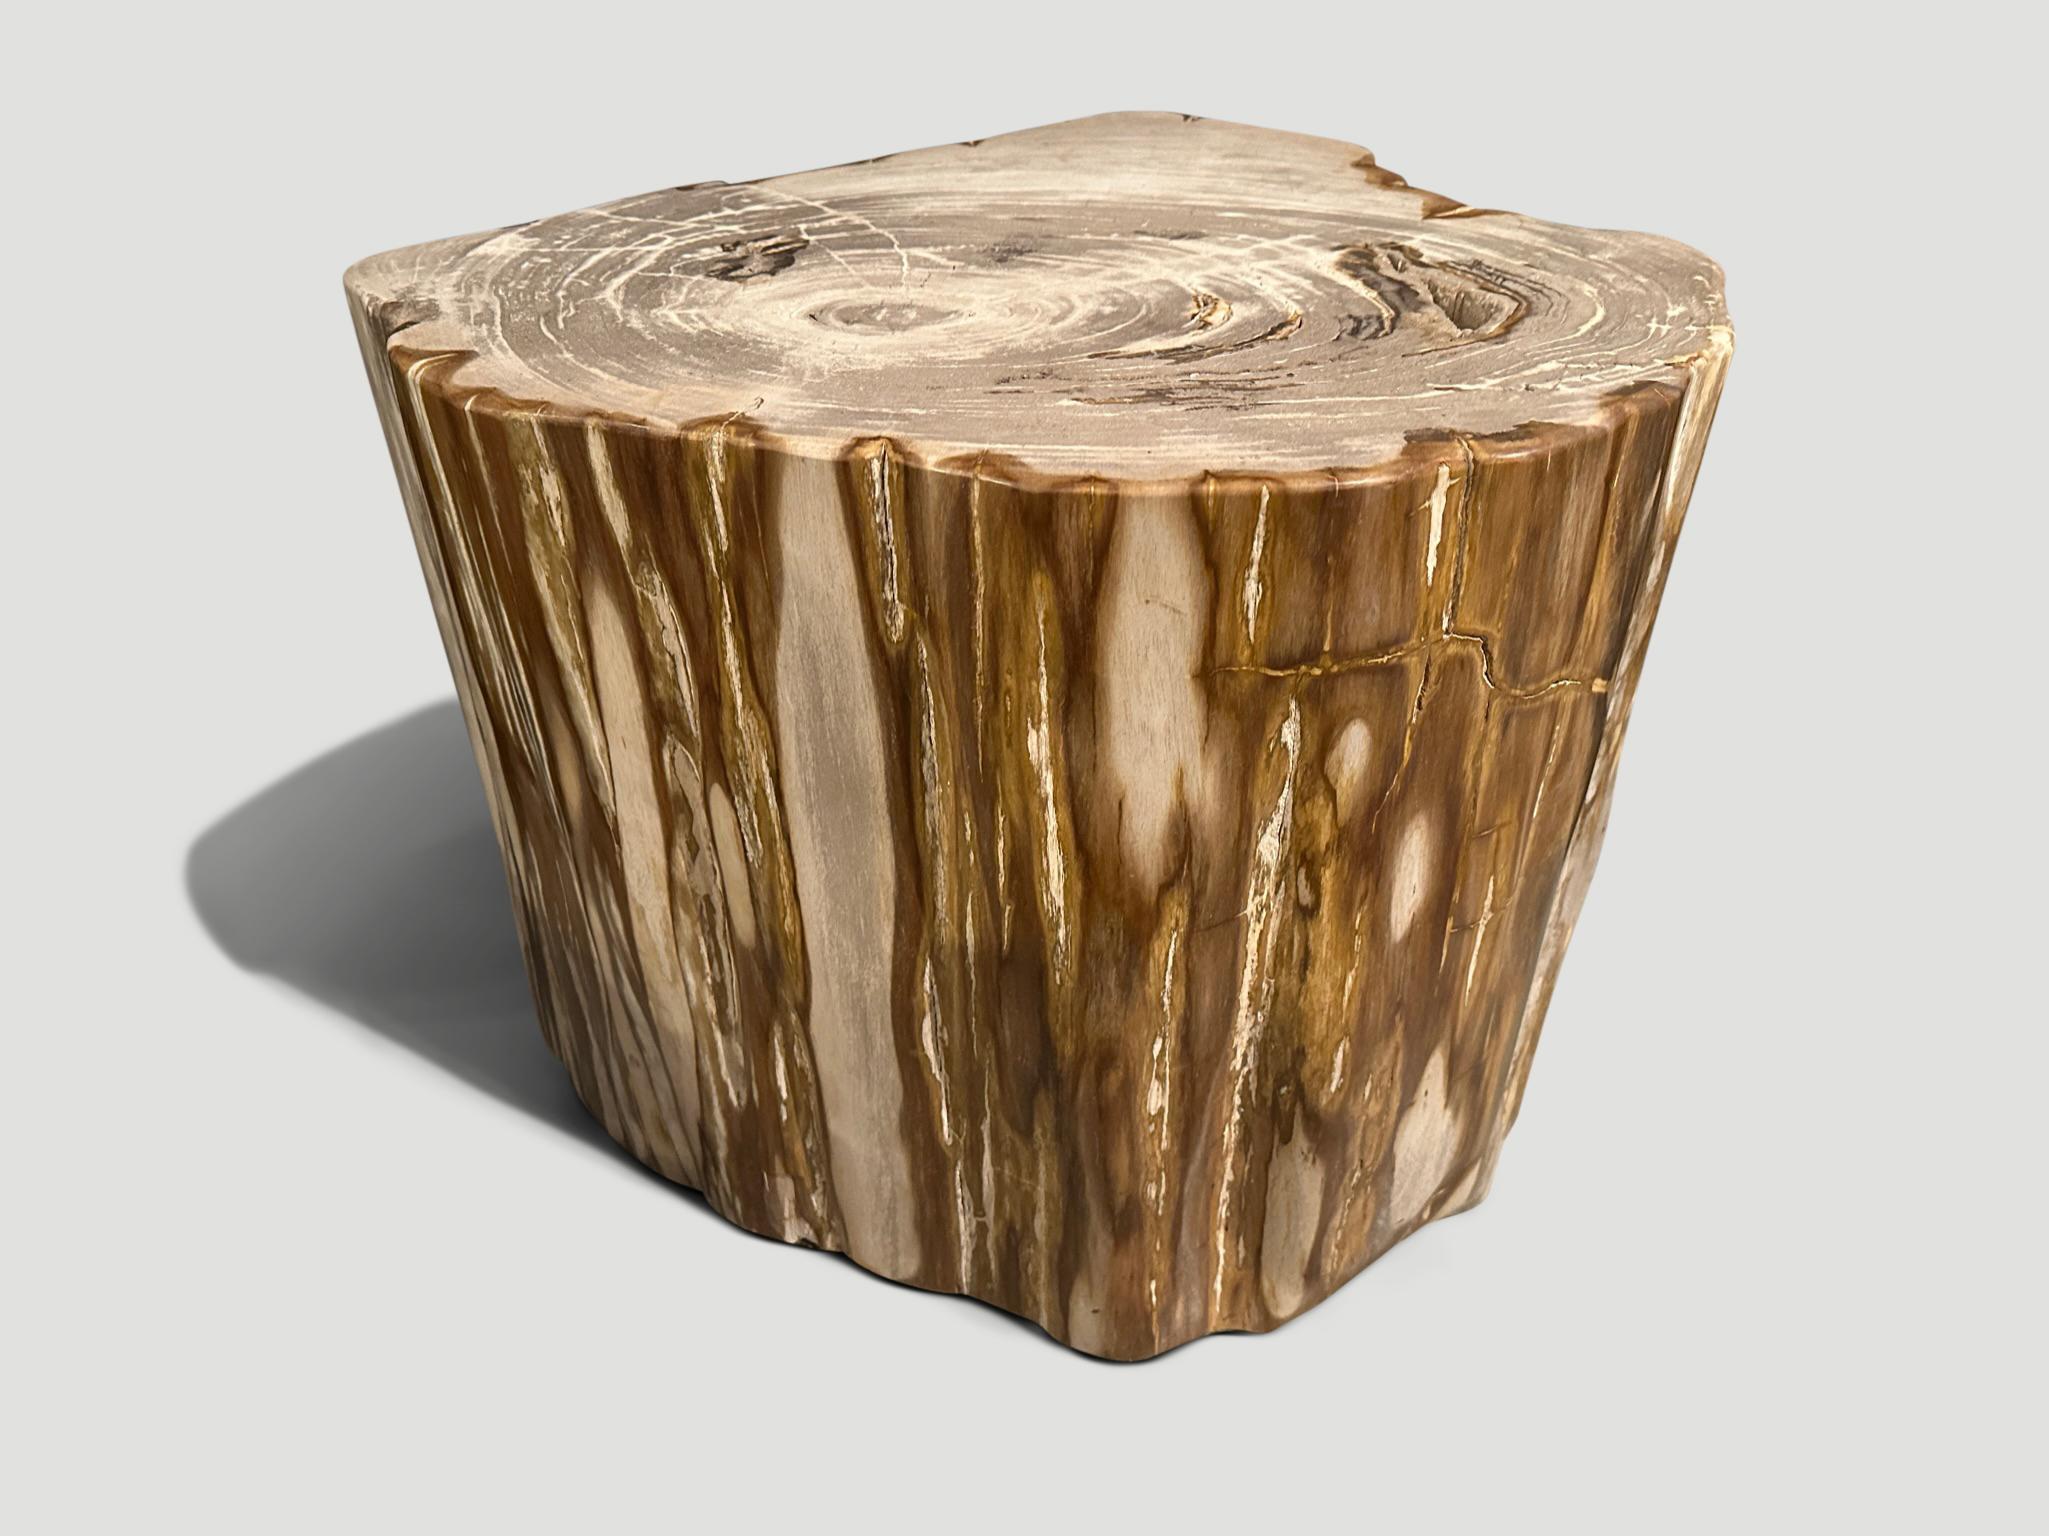 Impressive high quality petrified wood side table. It’s fascinating how Mother Nature produces these stunning 40 million year old petrified teak logs with such contrasting colors and natural patterns throughout. Modern yet with so much history. This